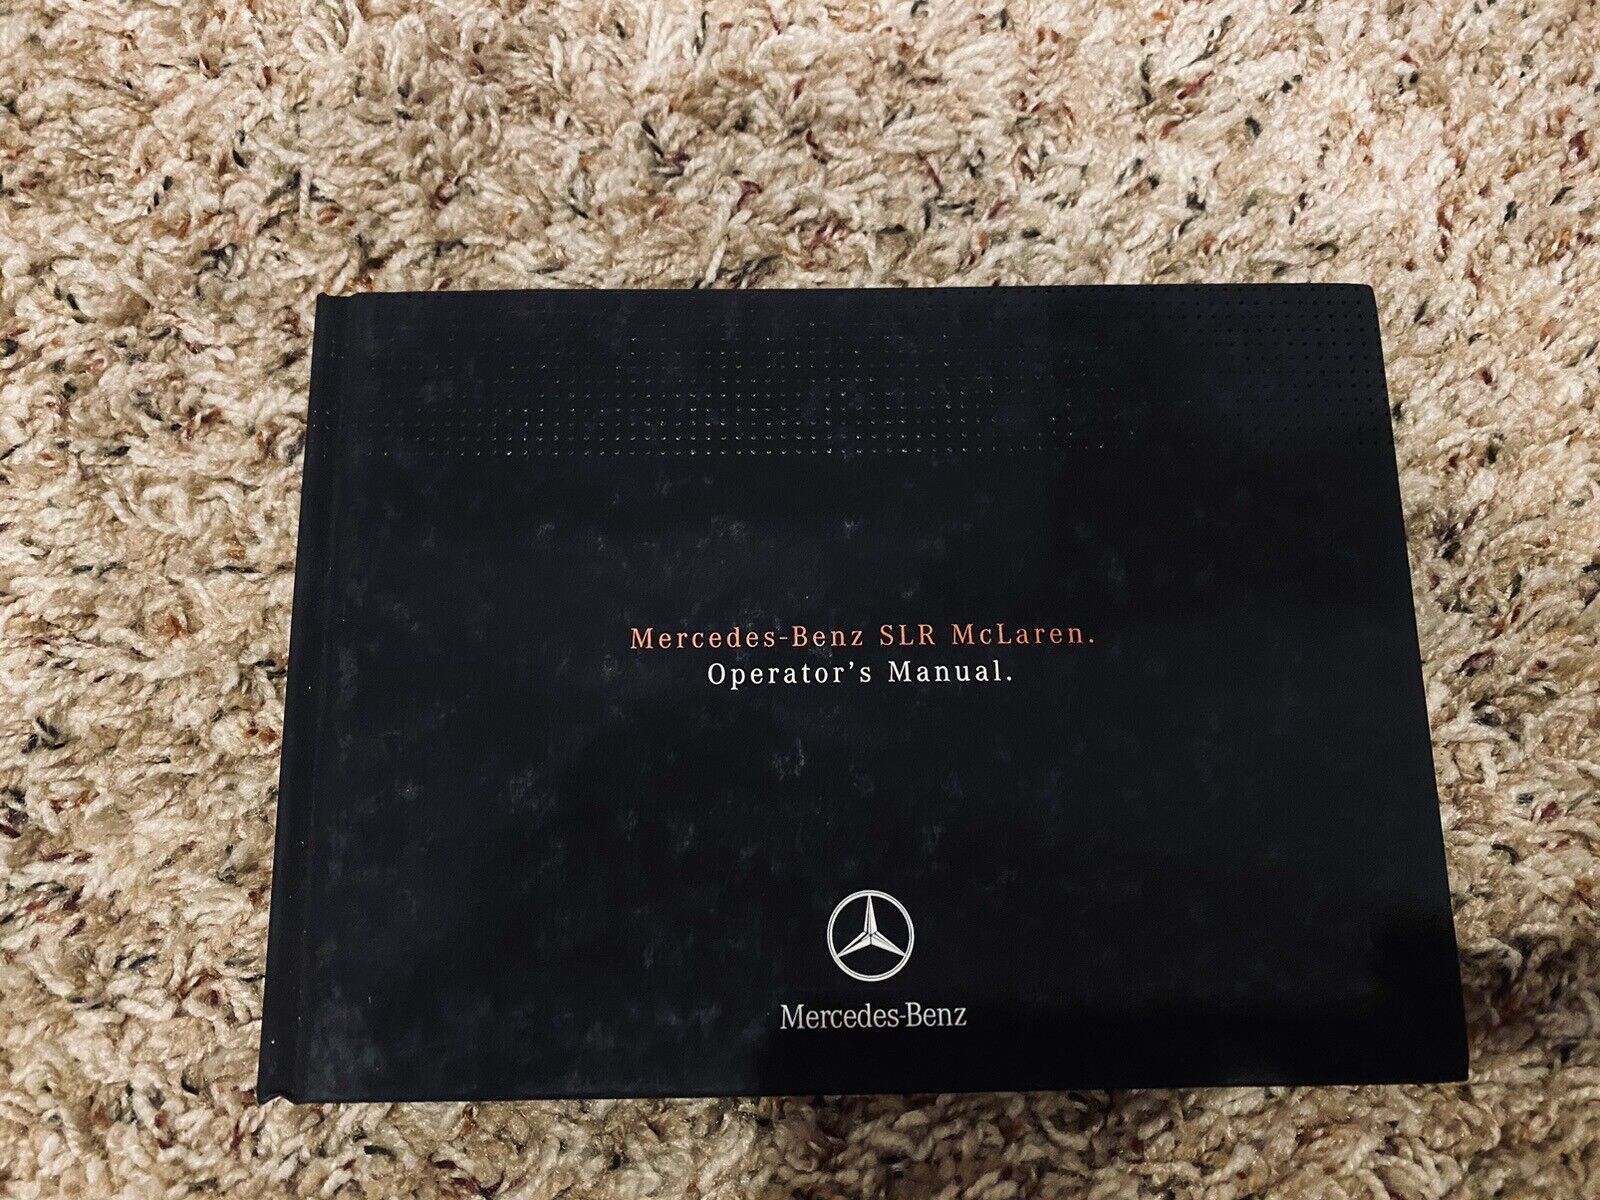 🟧NOS) 2007 MERCEDES BENZ SLR MCLAREN OWNERS MANUAL 722 EDTION (2nd EDT UPDATE)